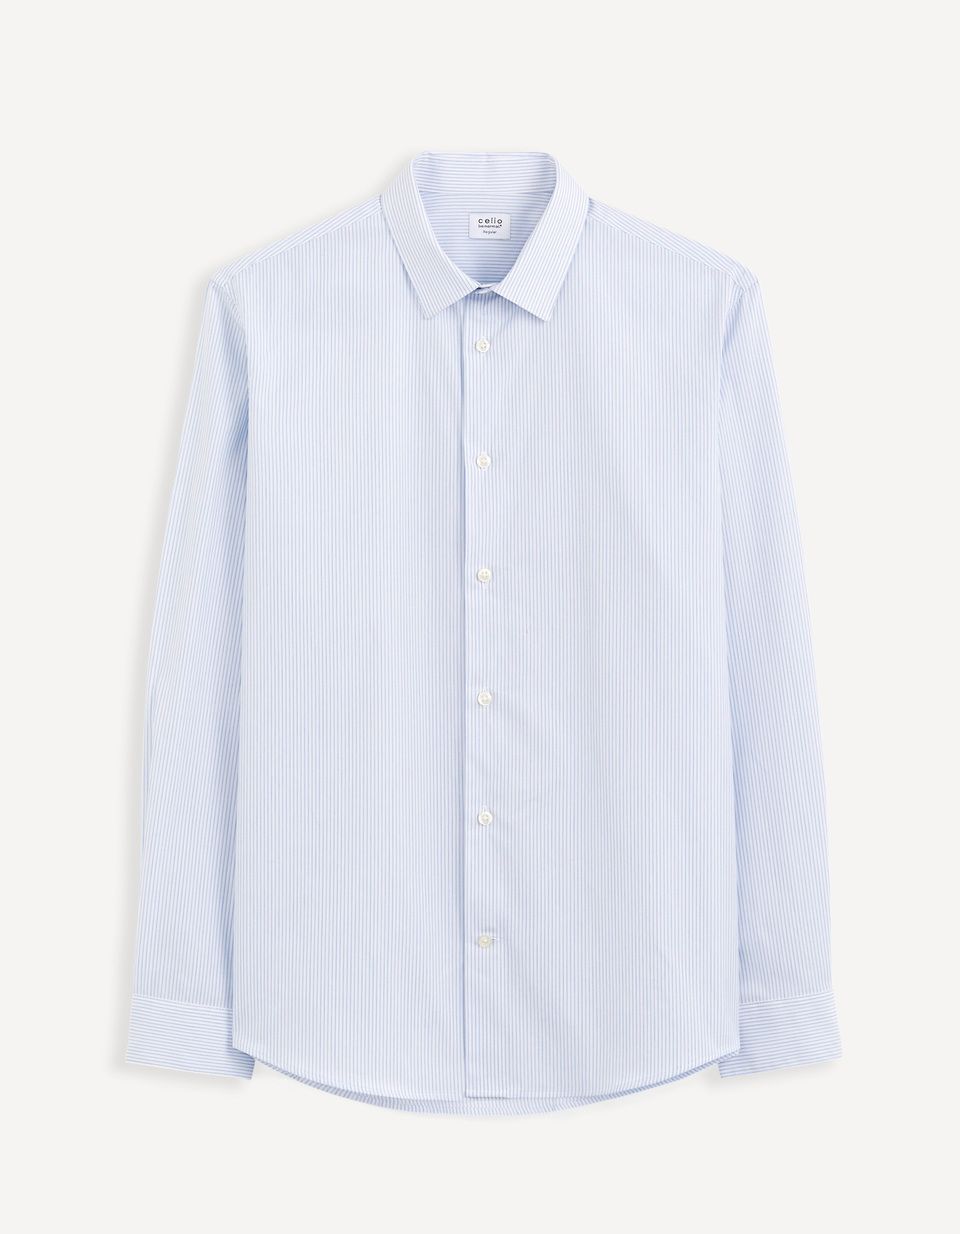 CELIO. CASUAL SHIRT WITH STRIPS | LIGHT BLUE